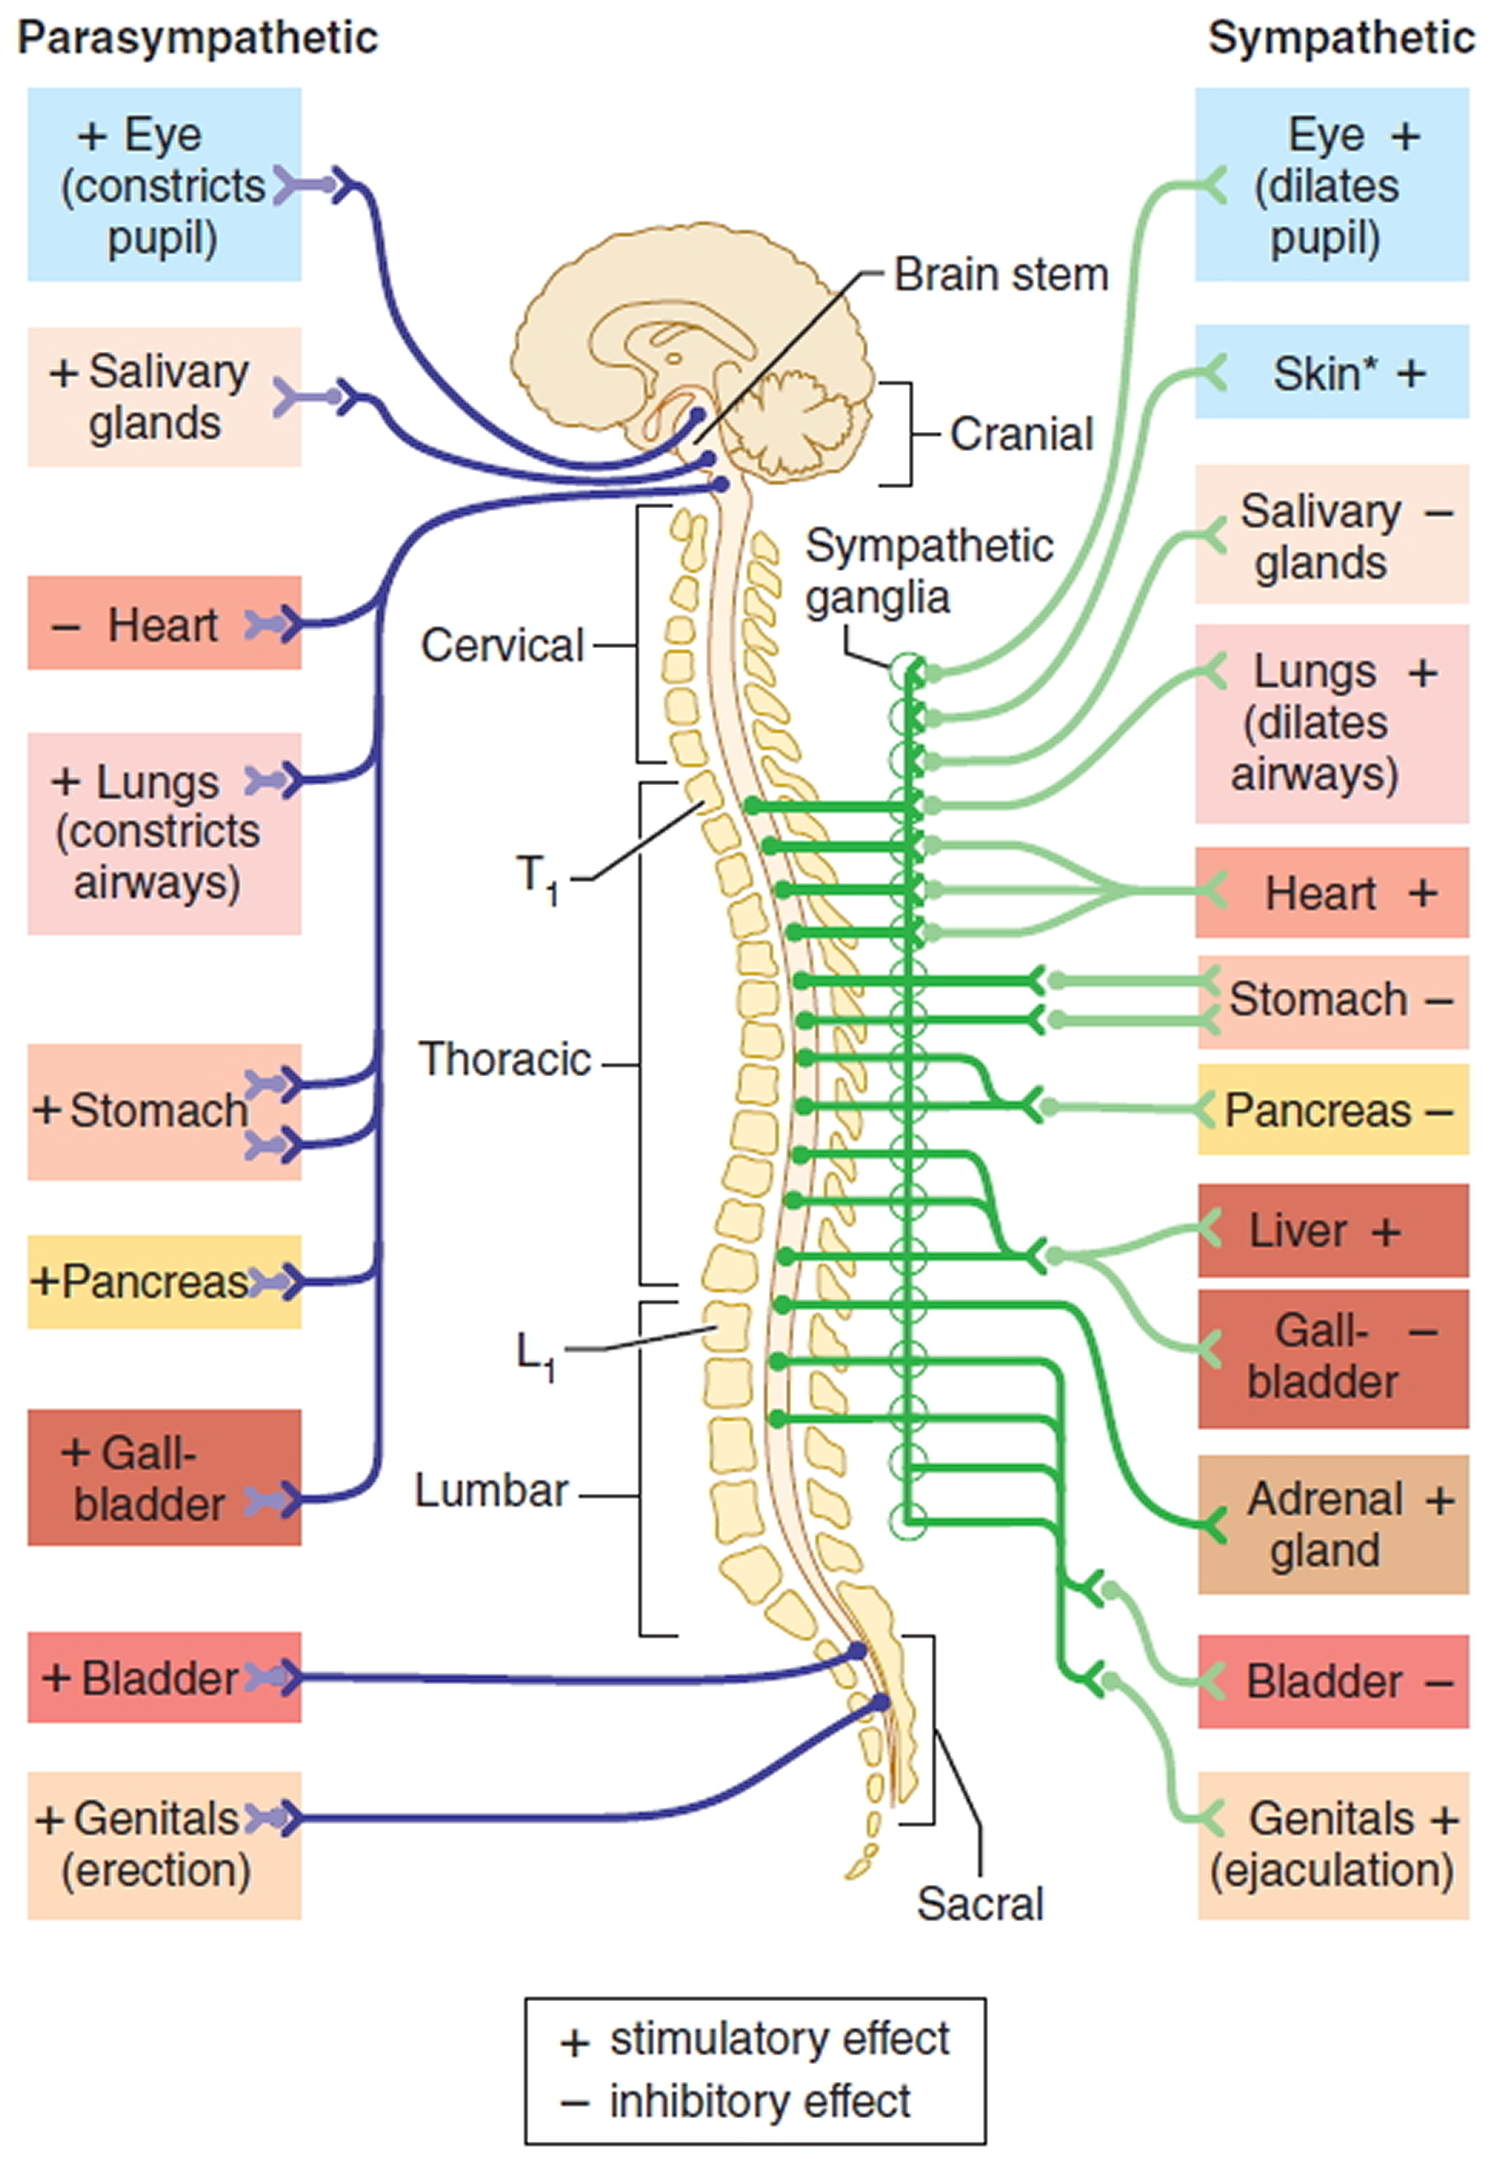 examples of somatic nervous system